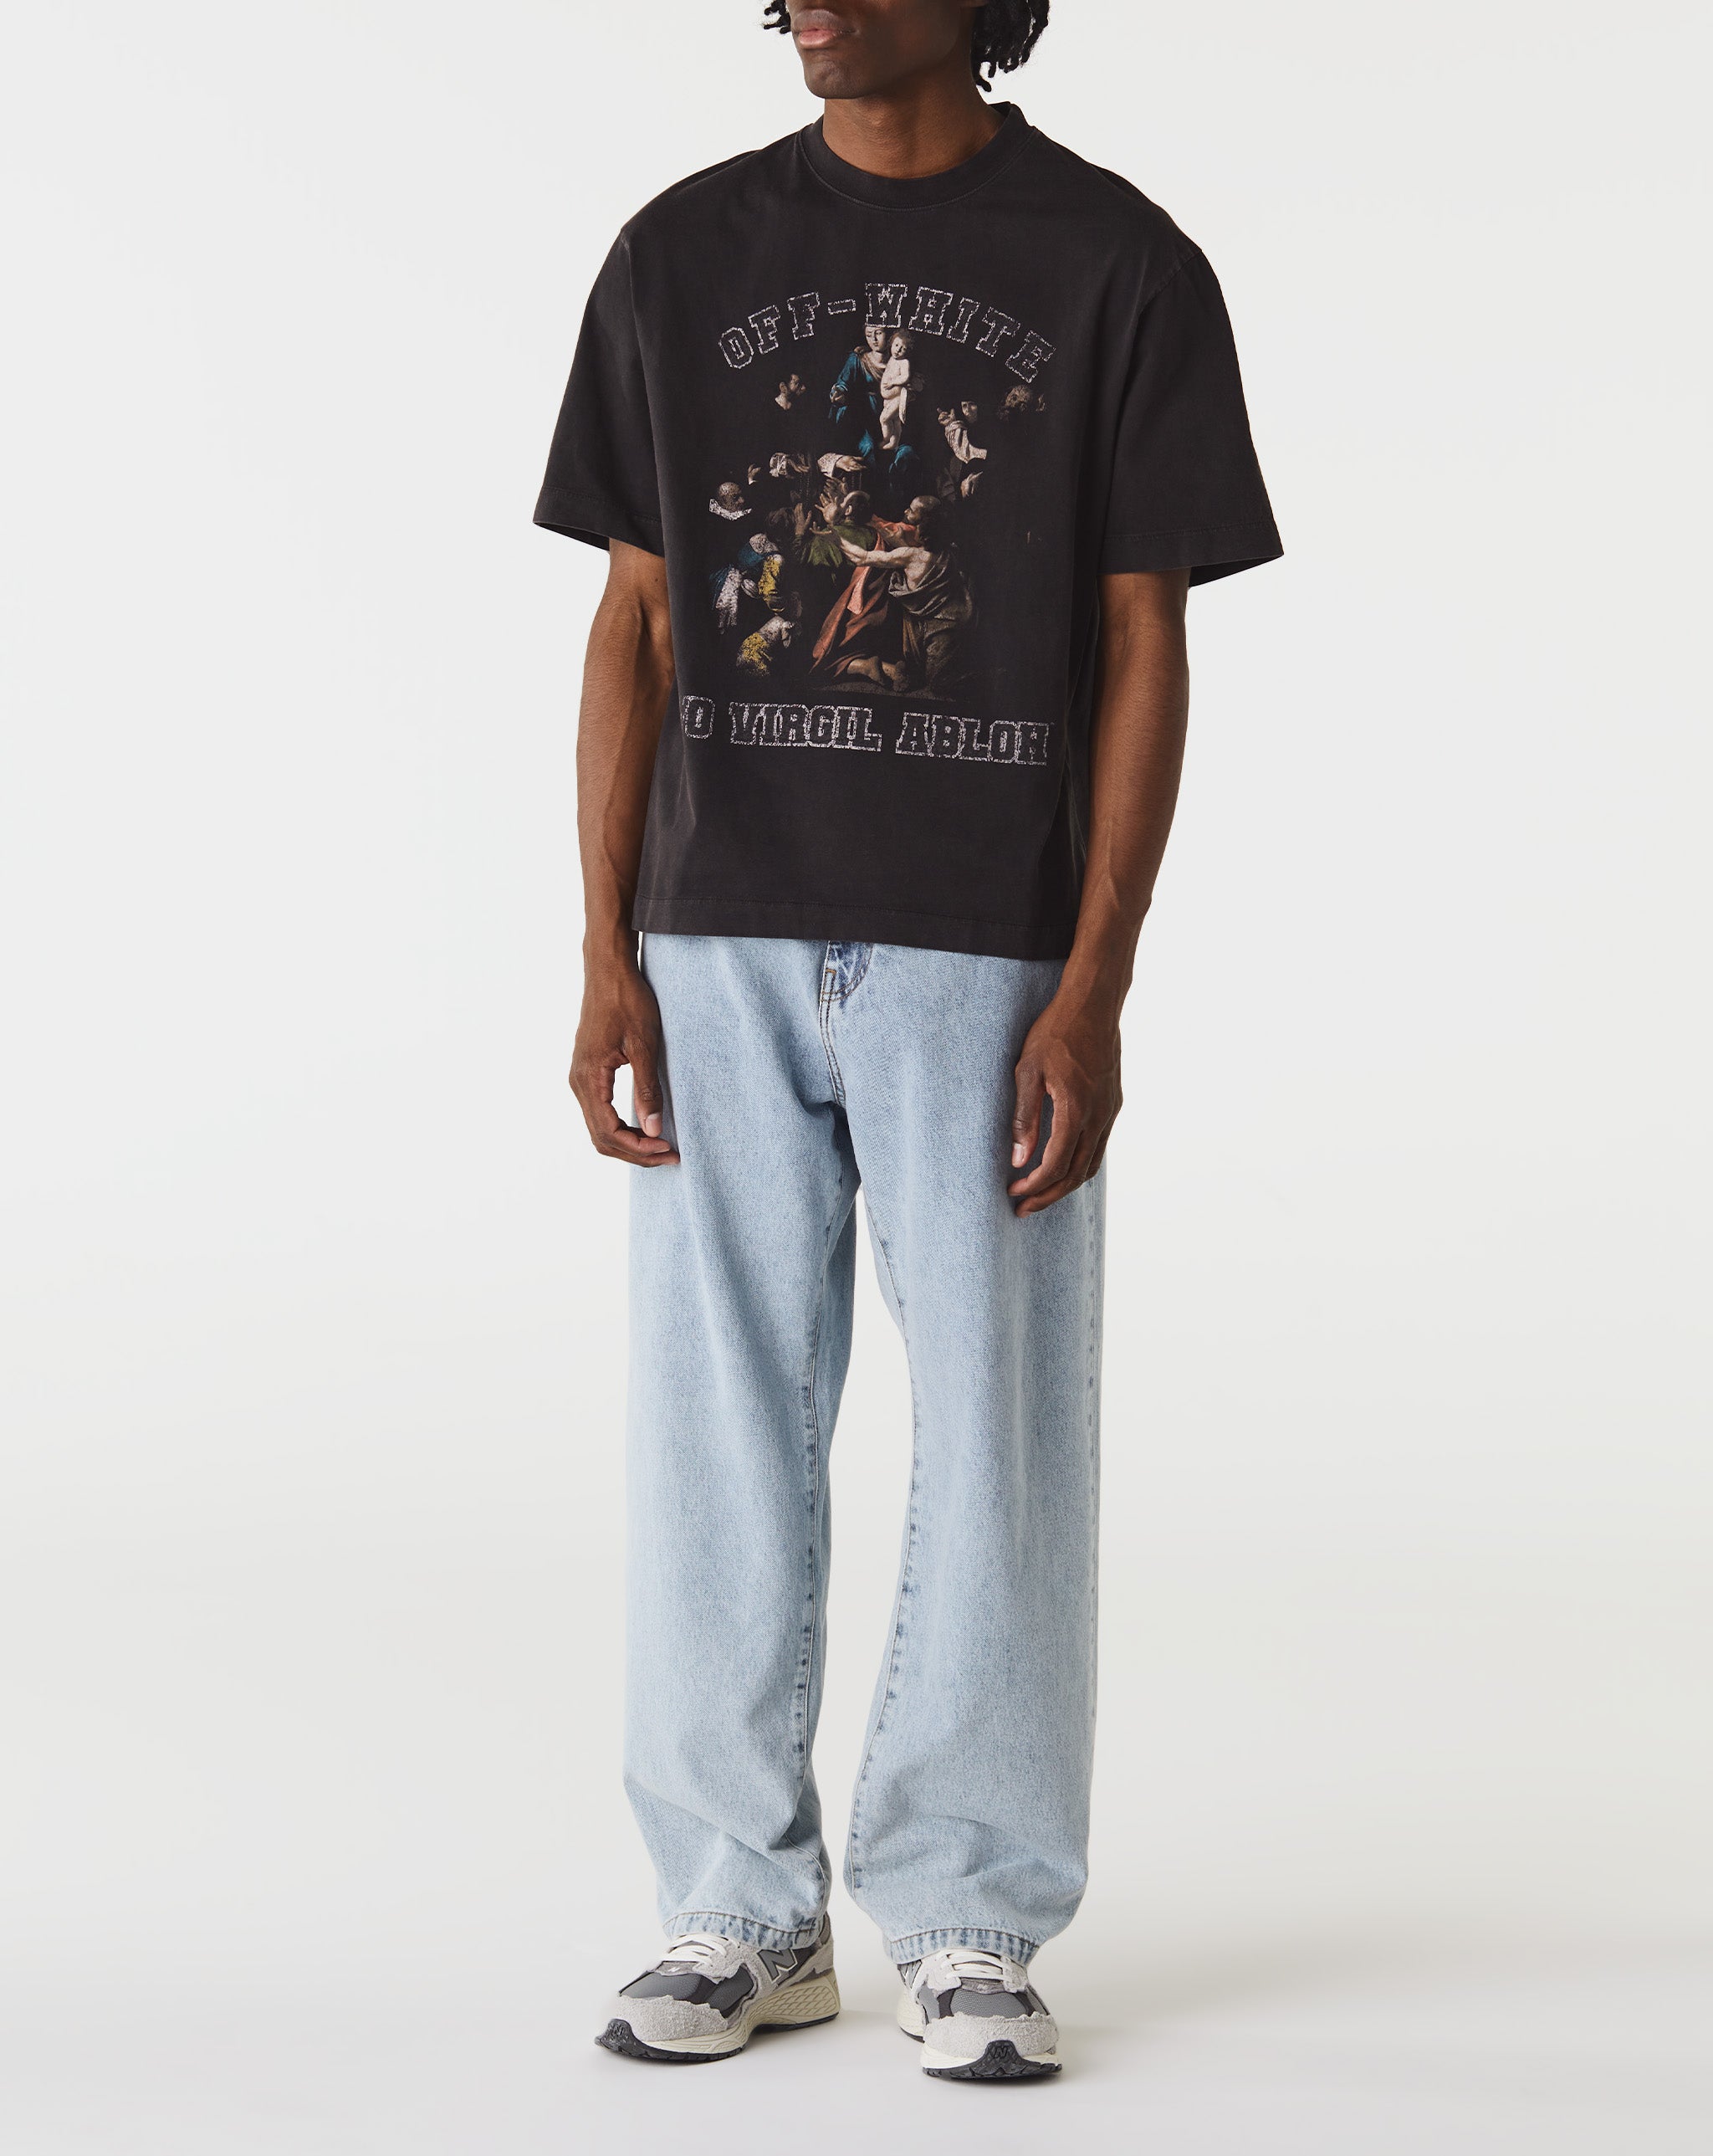 Off-White Mary Skate Short Sleeve T-Shirt - Rule of Next Apparel